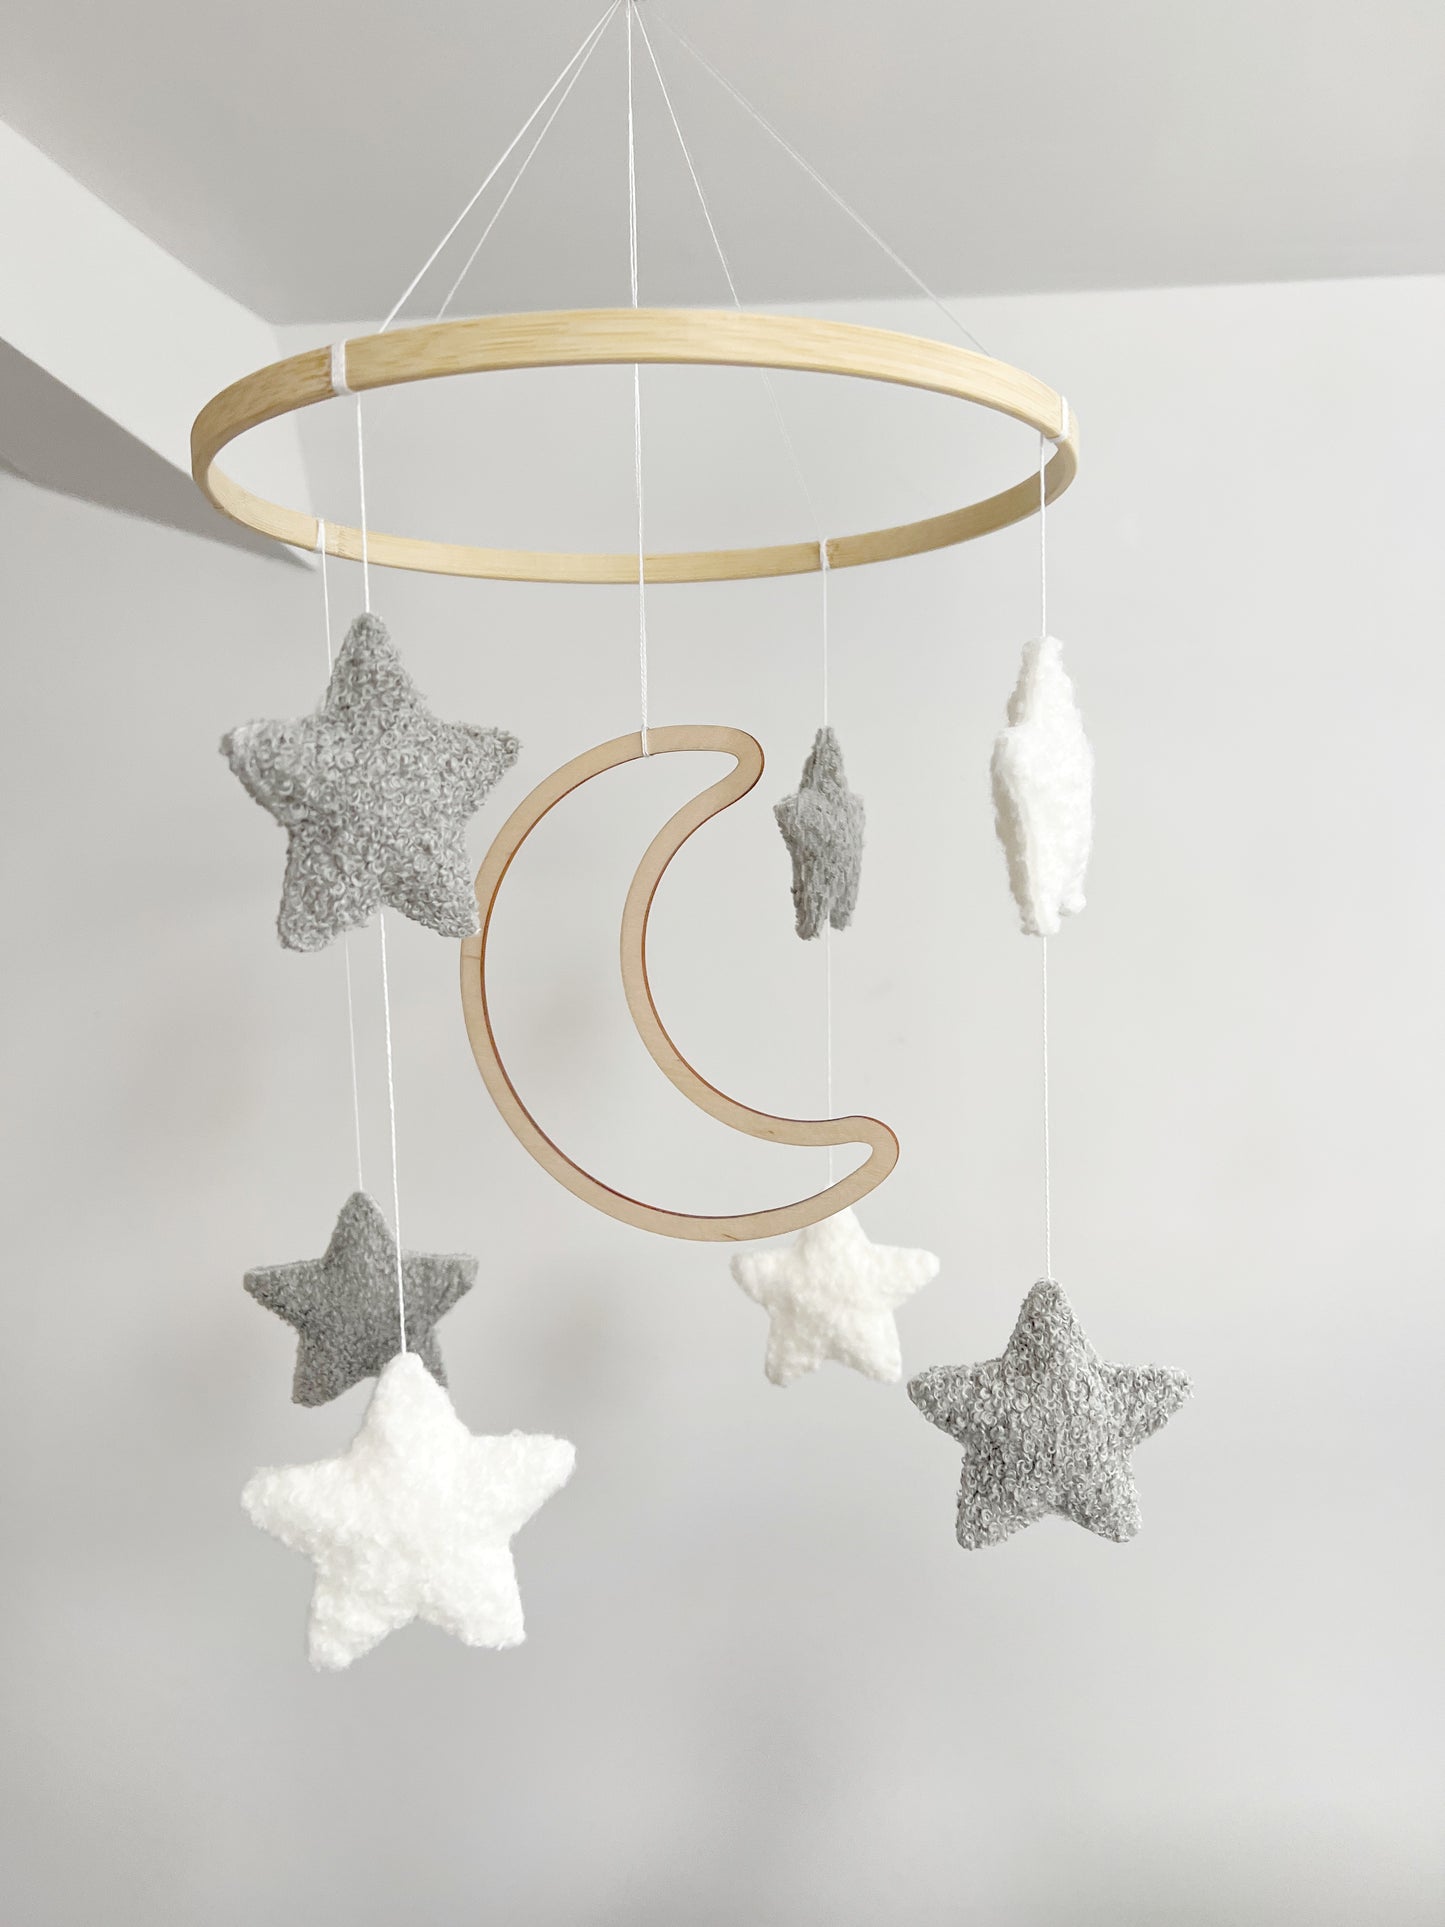 Wooden Moon with Ivory & Light Grey Bouclé Stars Cot Mobile